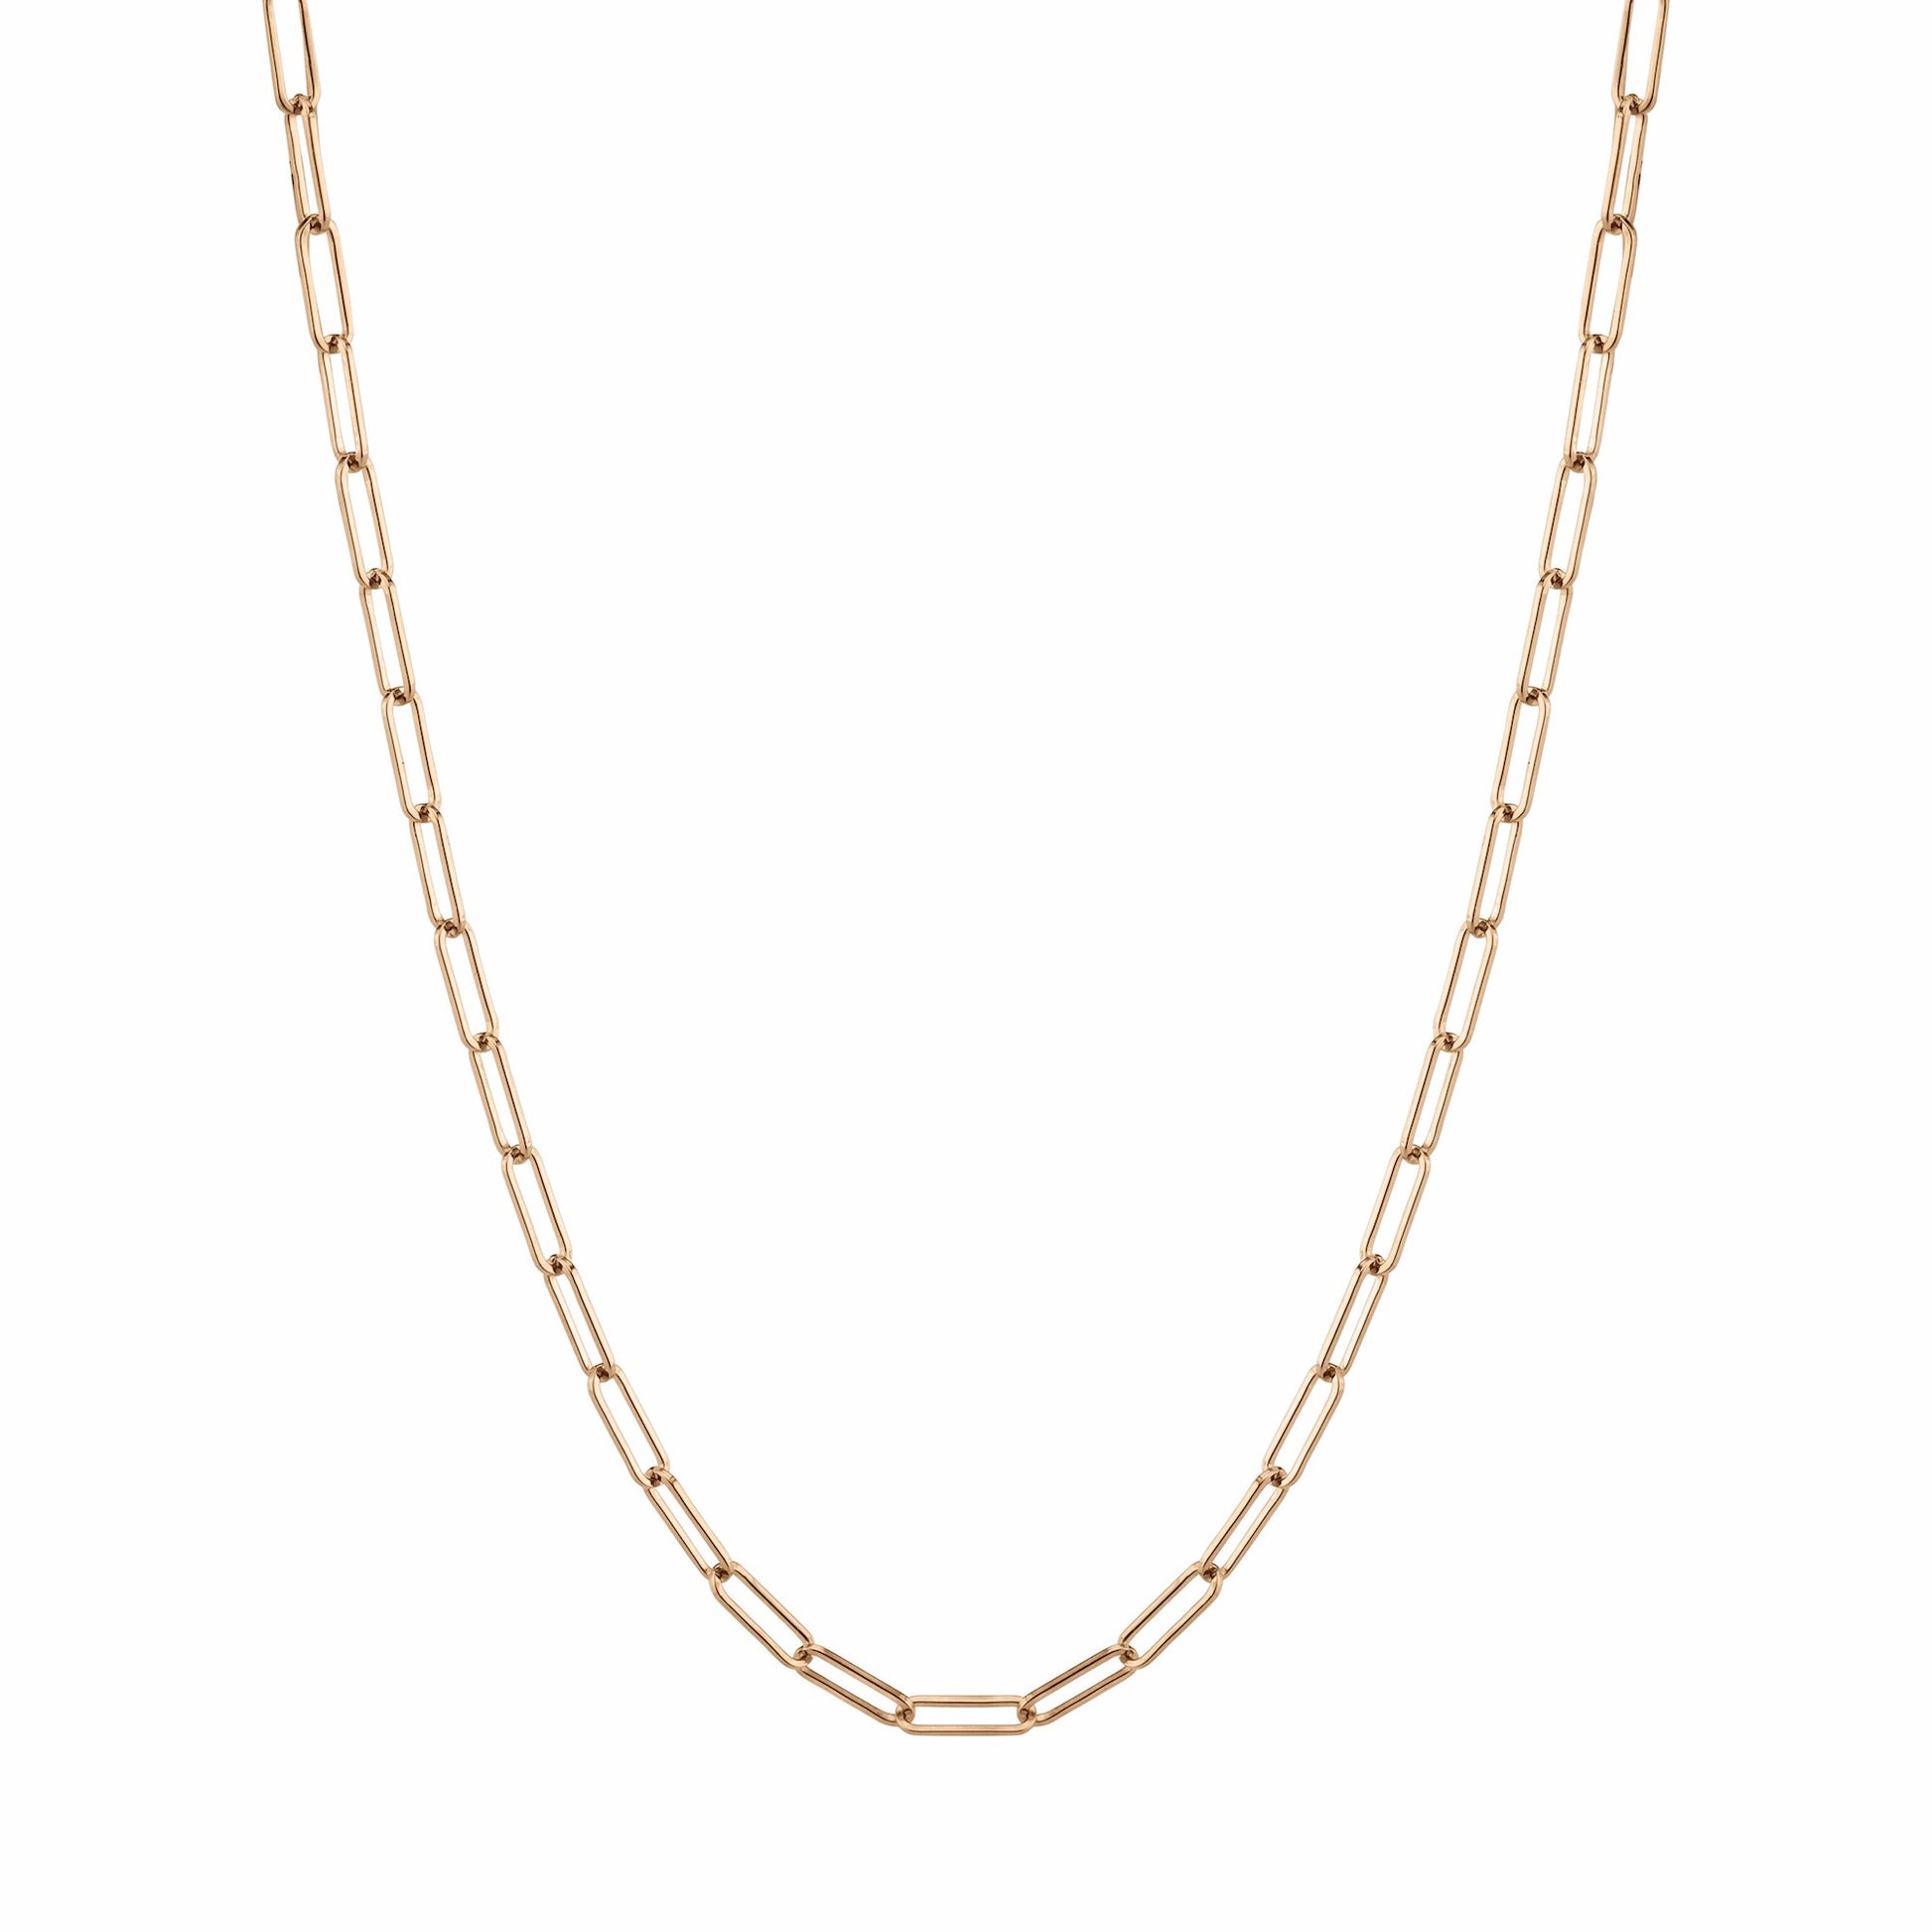 Staple Chain Necklace 14K Rose Gold / 16In